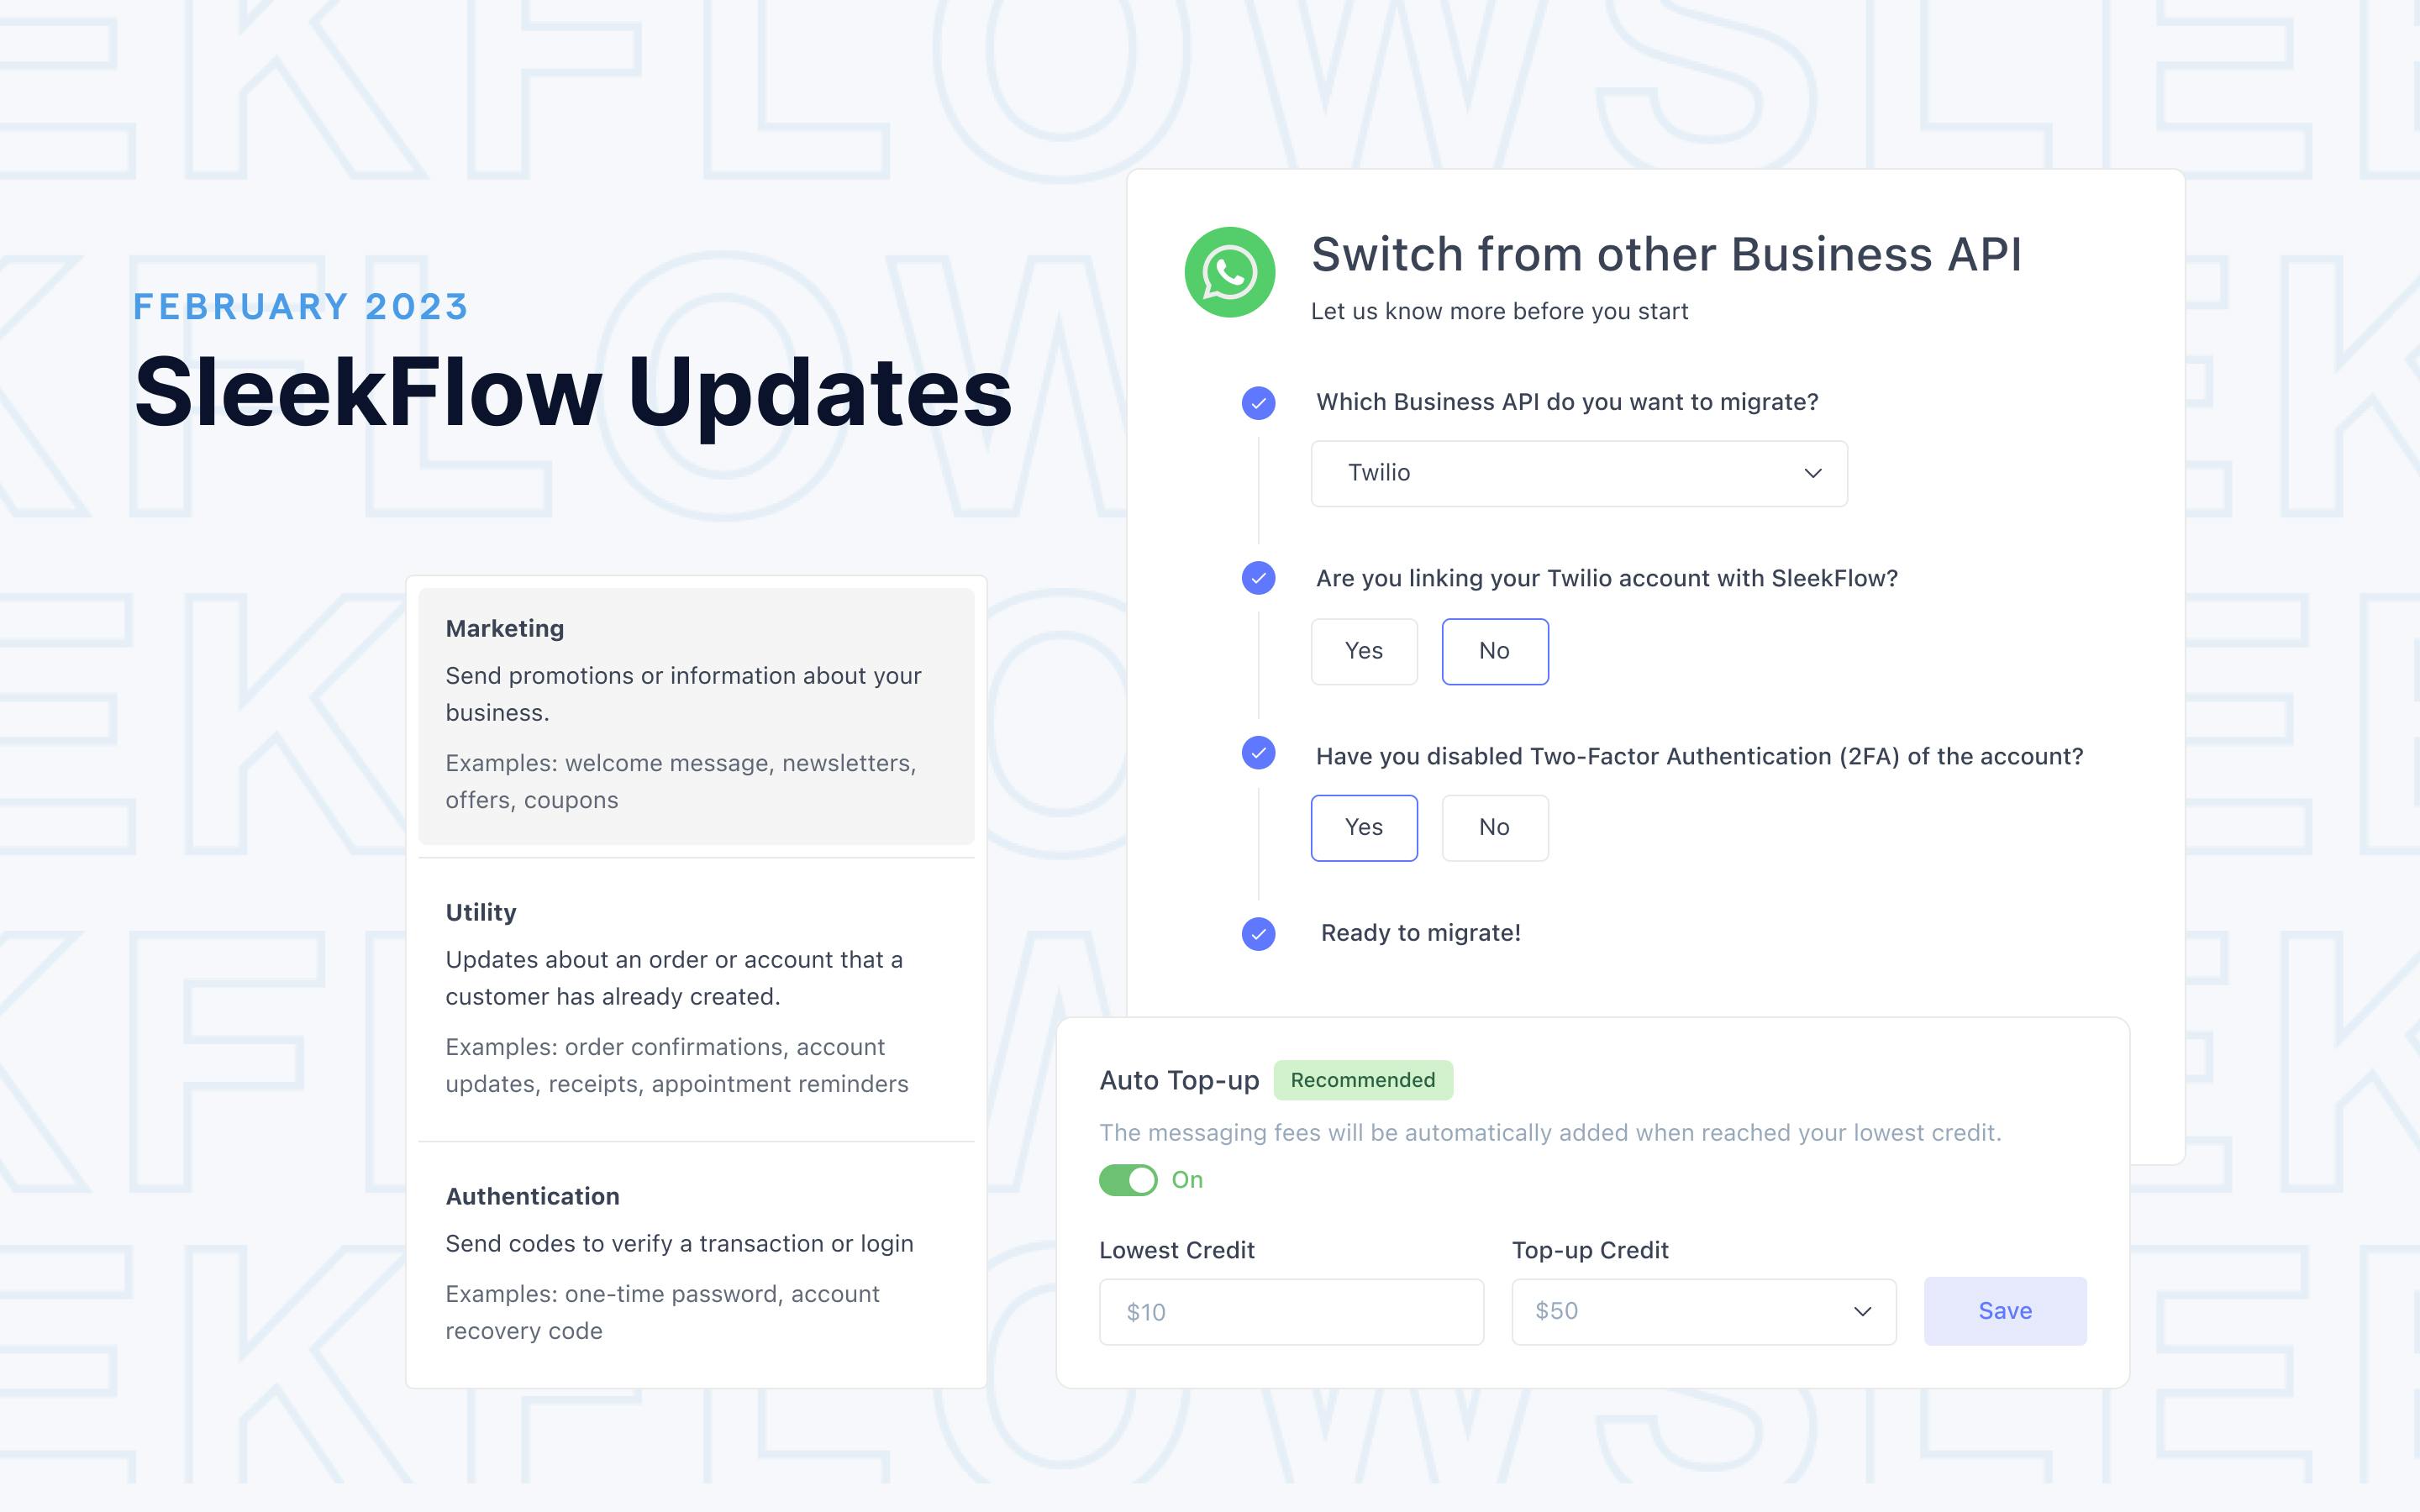 SleekFlow’s WhatsApp Cloud API features for hassle-free operations